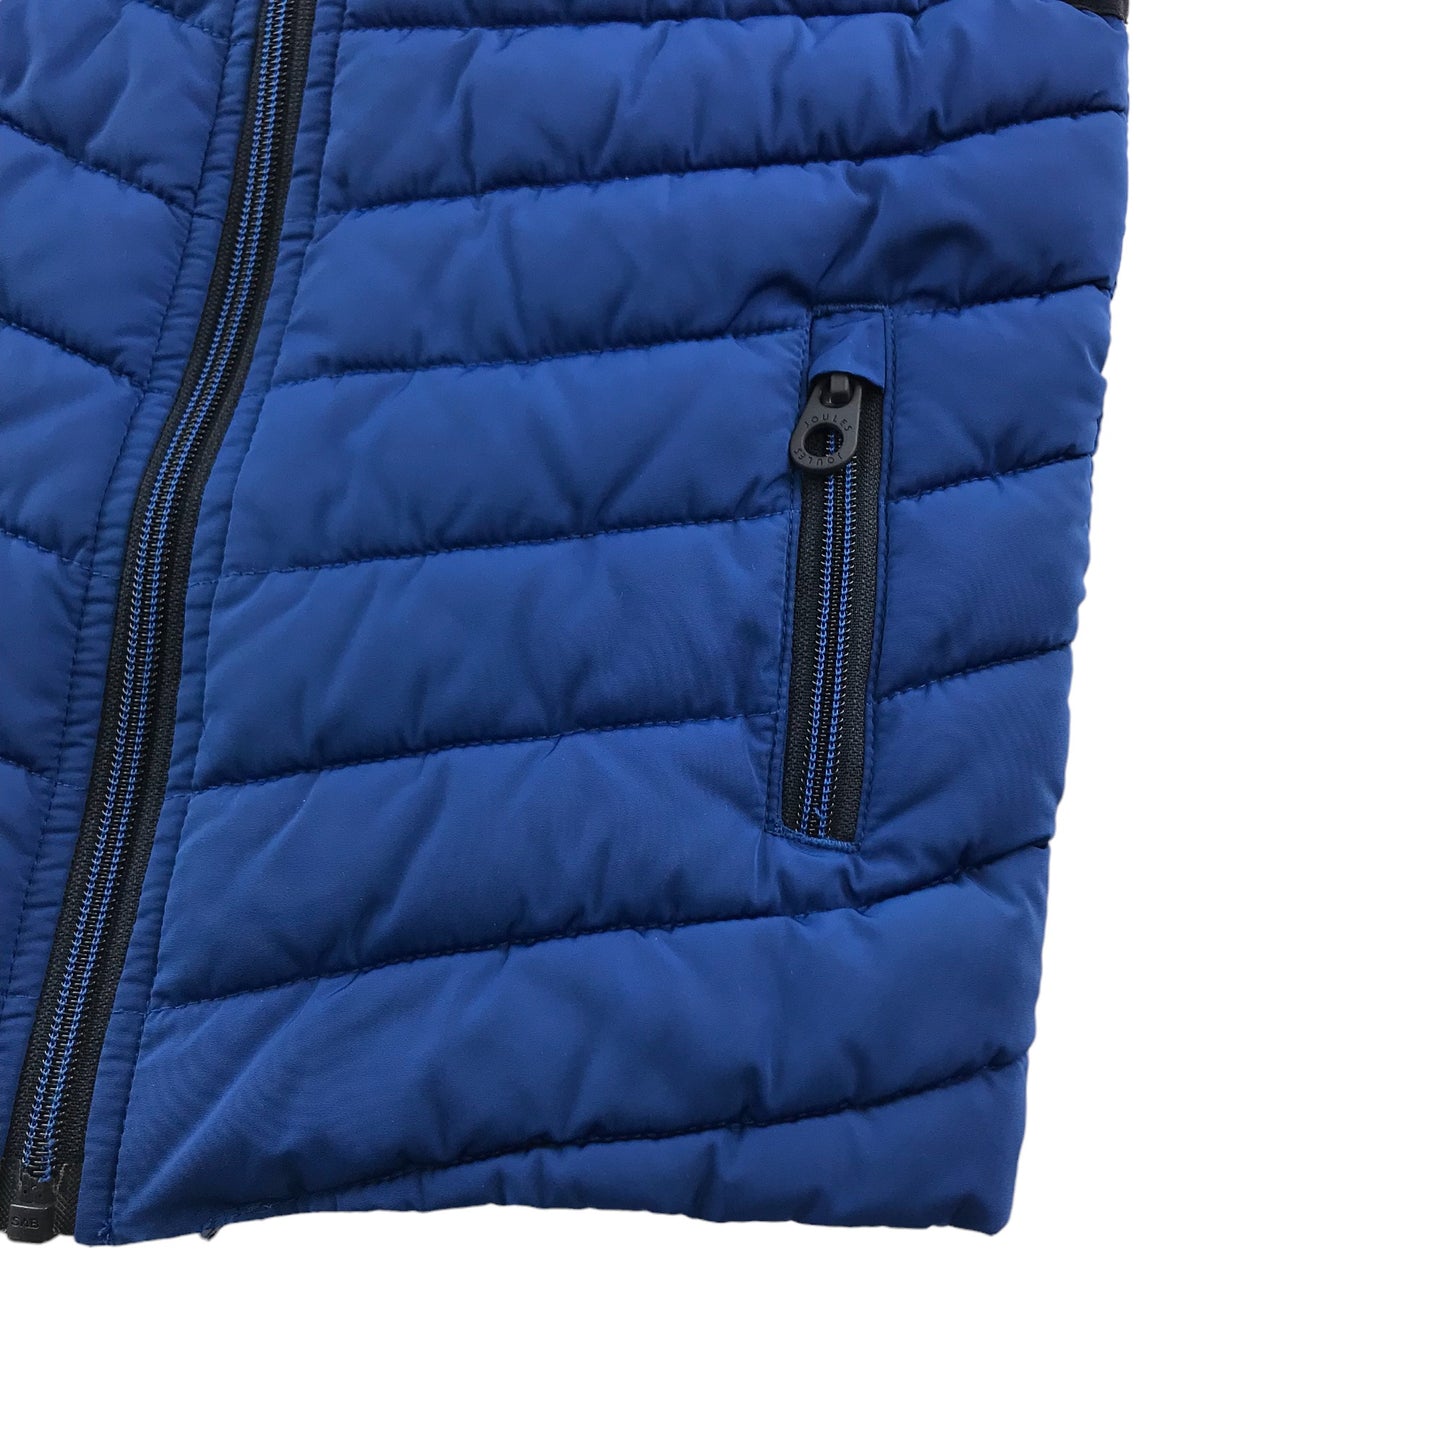 Joules Gilet Age 5 Navy and Blue Light Puffer with full zip and high collar